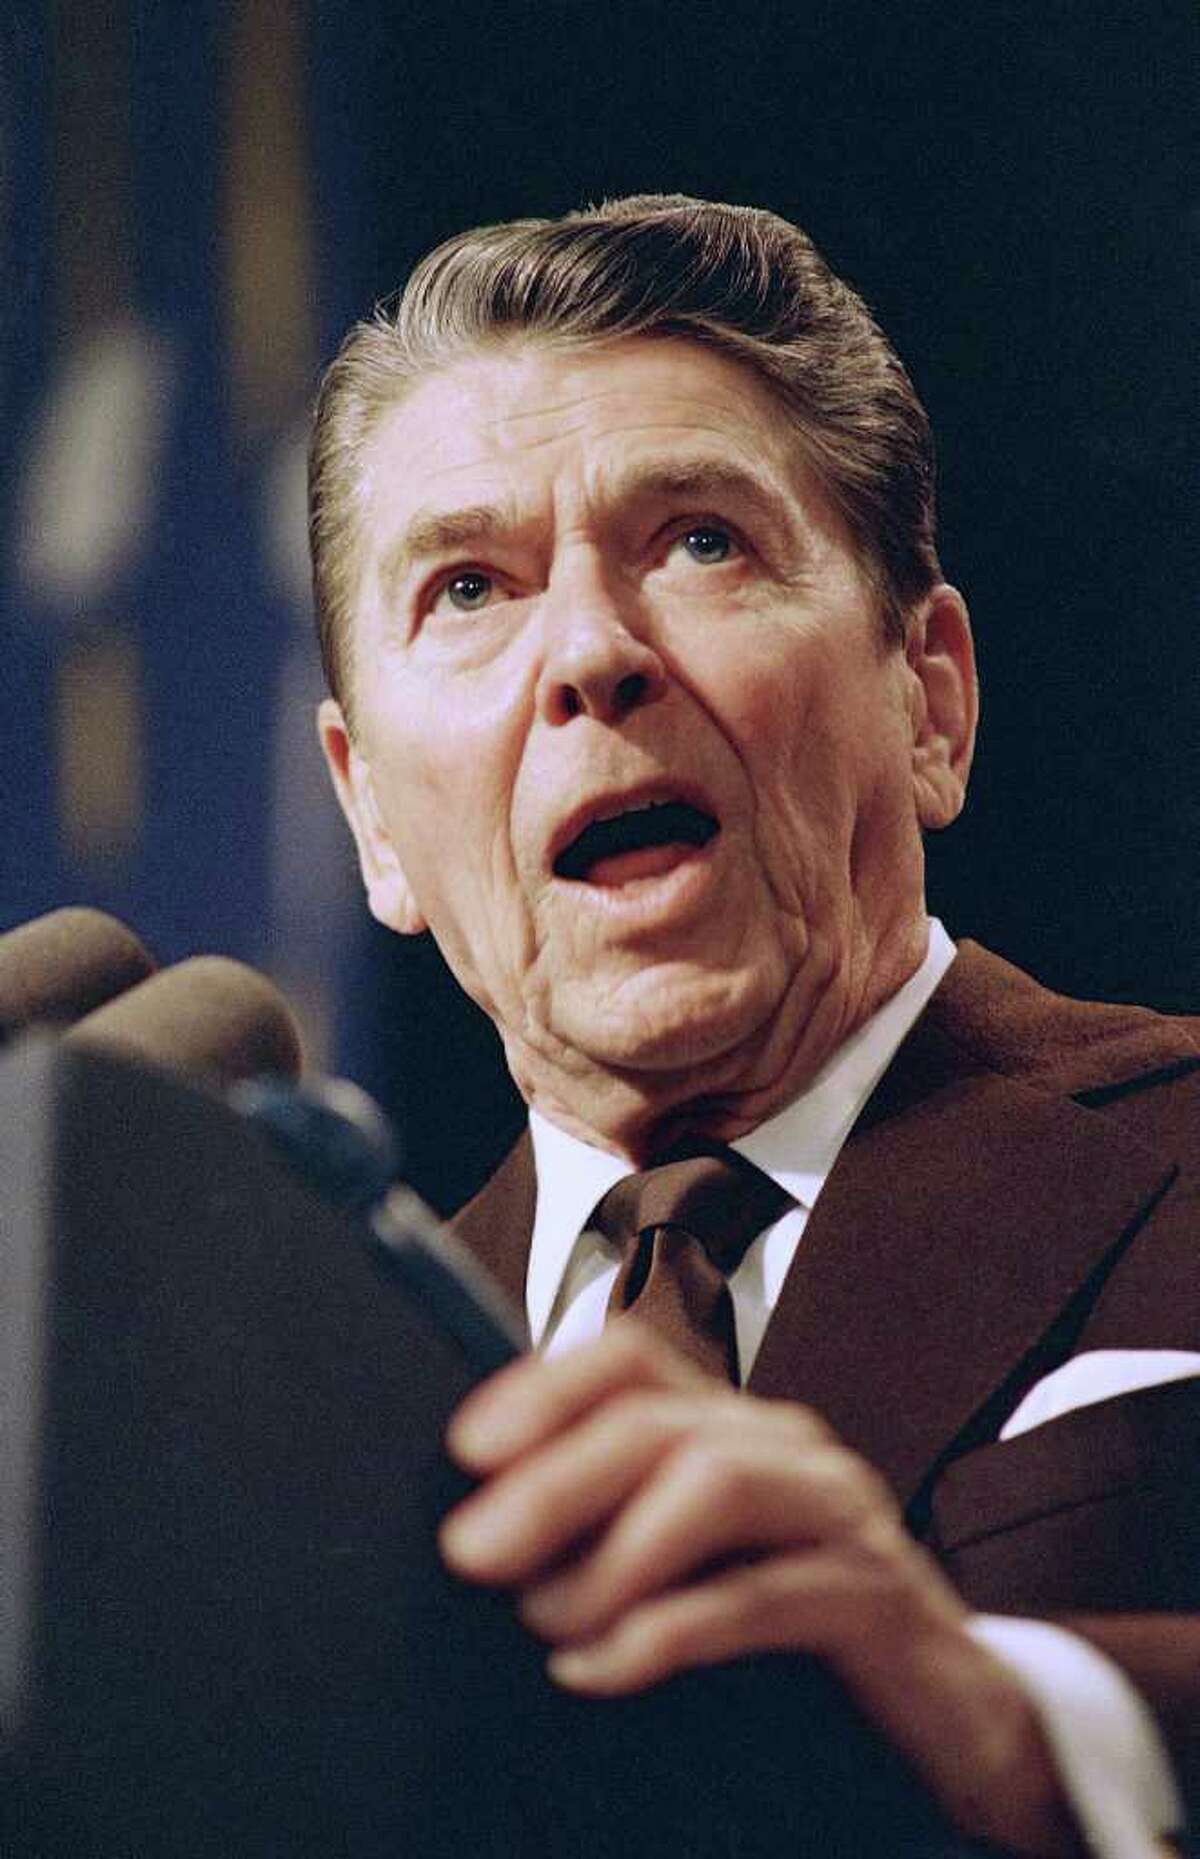 FILE - In this April 21, 1988 file photo, President Ronald Reagan speaks in Springfield, Mass. What gives? Some of Mitt Romney?s rivals are waging a fierce attack on him that you?d never think would come from the mouths of Republicans who claim Ronald Reagan as their hero. They?re blasting the GOP front-runner for aggressive wealth-creating business tactics, a criticism that has the party in an uproar. (AP Photo/Ron Edmonds, File)